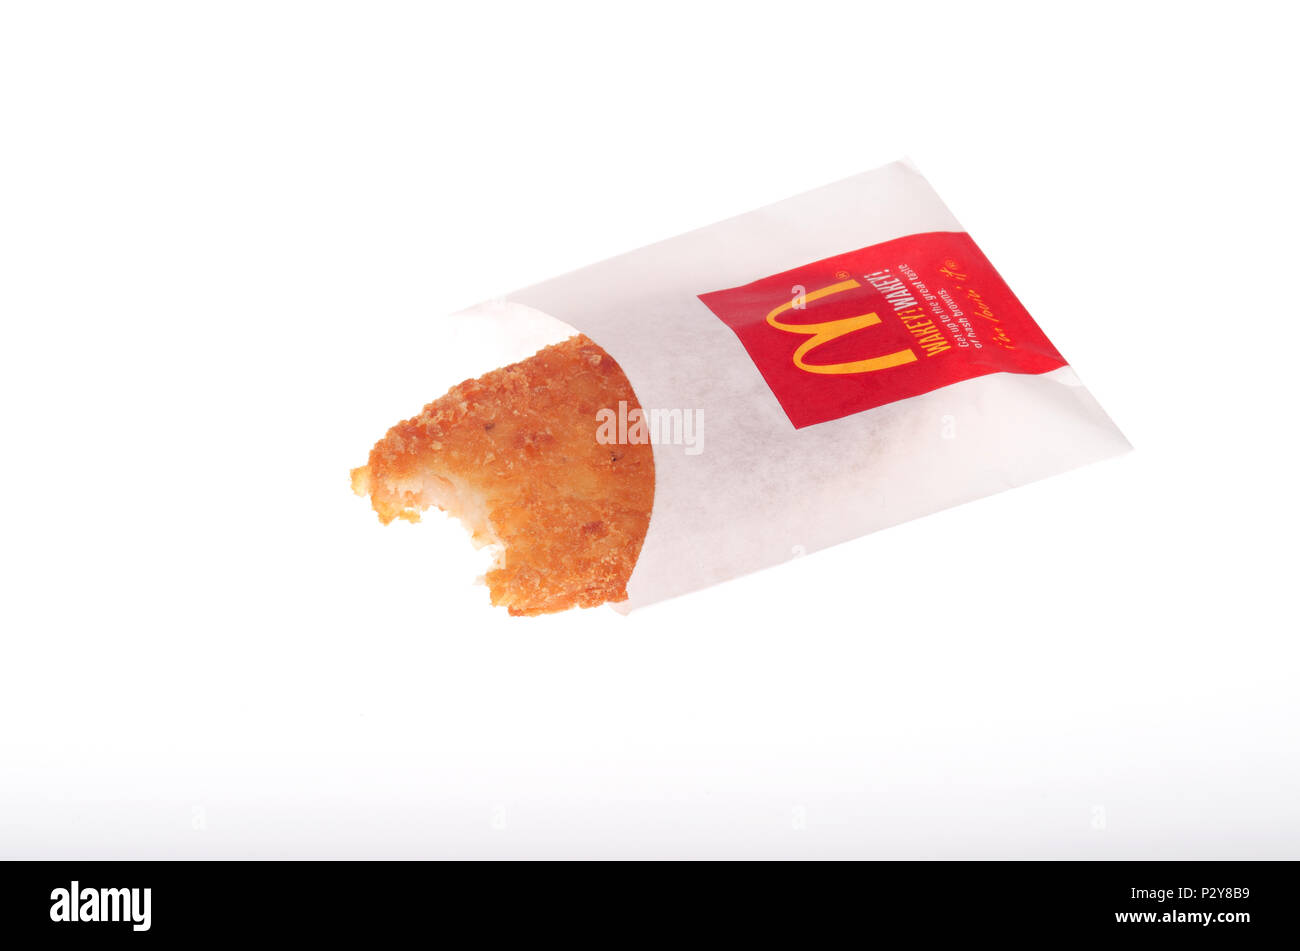 McDonald’s Hash Brown potato with bite taken out isolated on white background Stock Photo